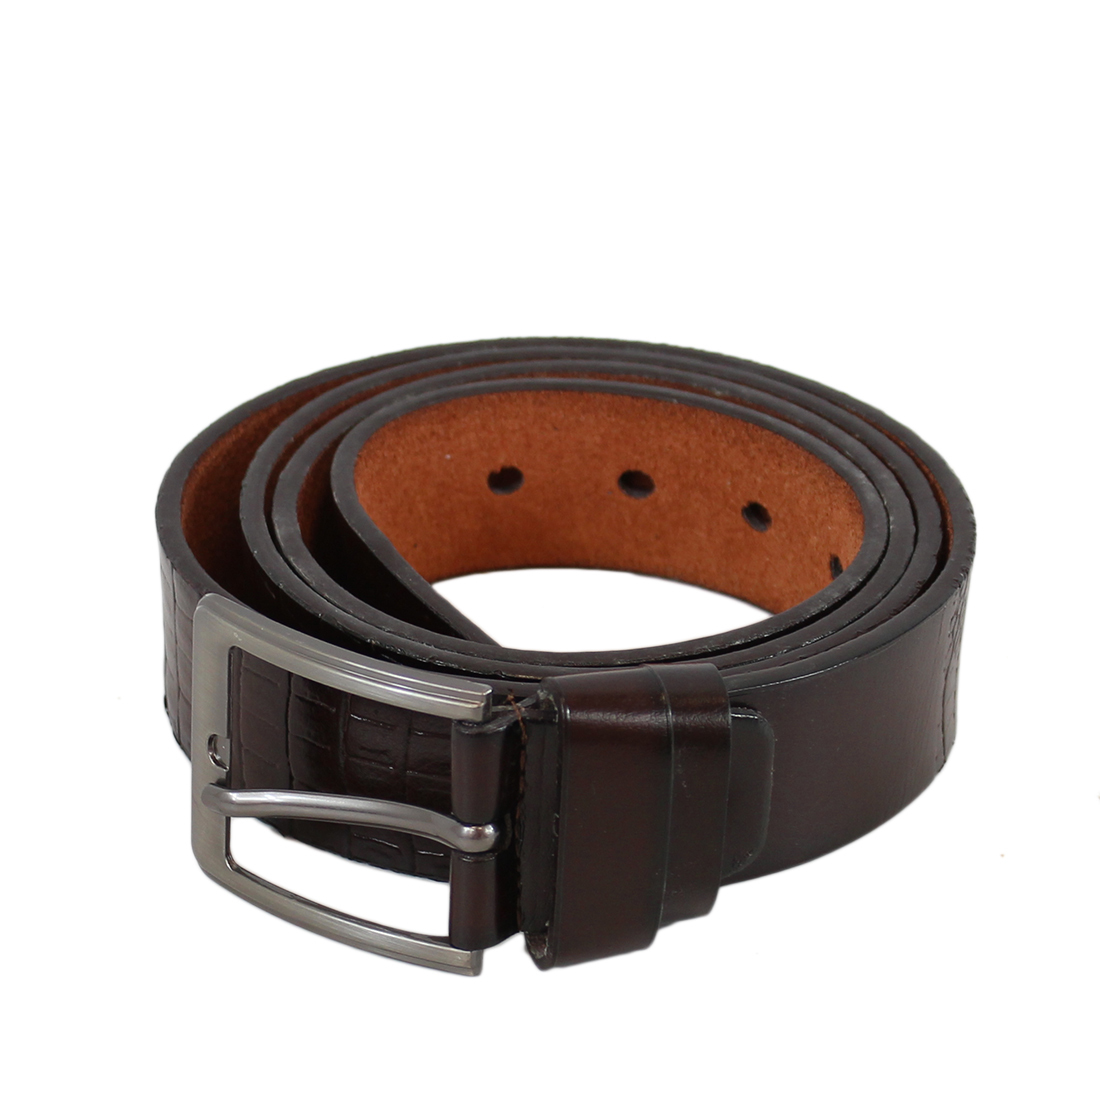 * Plain shiny wide leather belt with silver buckle